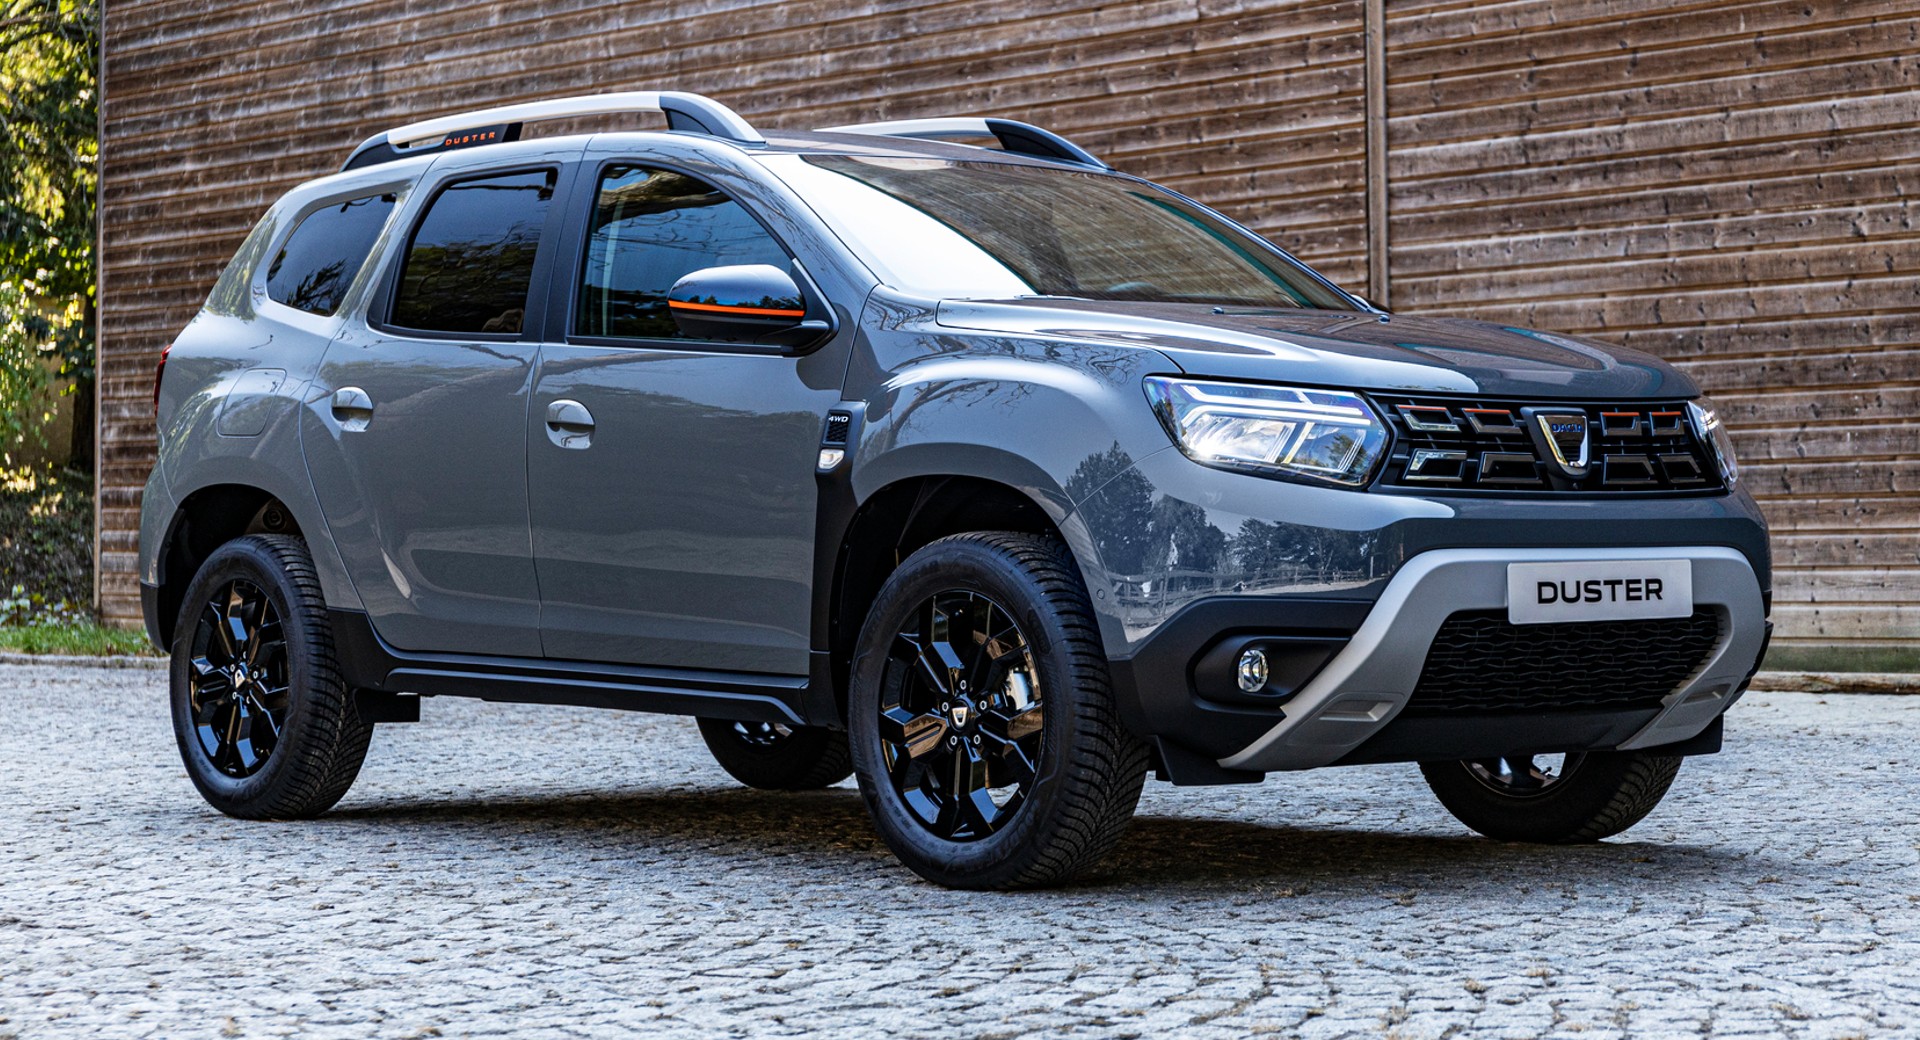 https://www.carscoops.com/wp-content/uploads/2022/02/Dacia-Duster-Extreme-SE-main.jpg